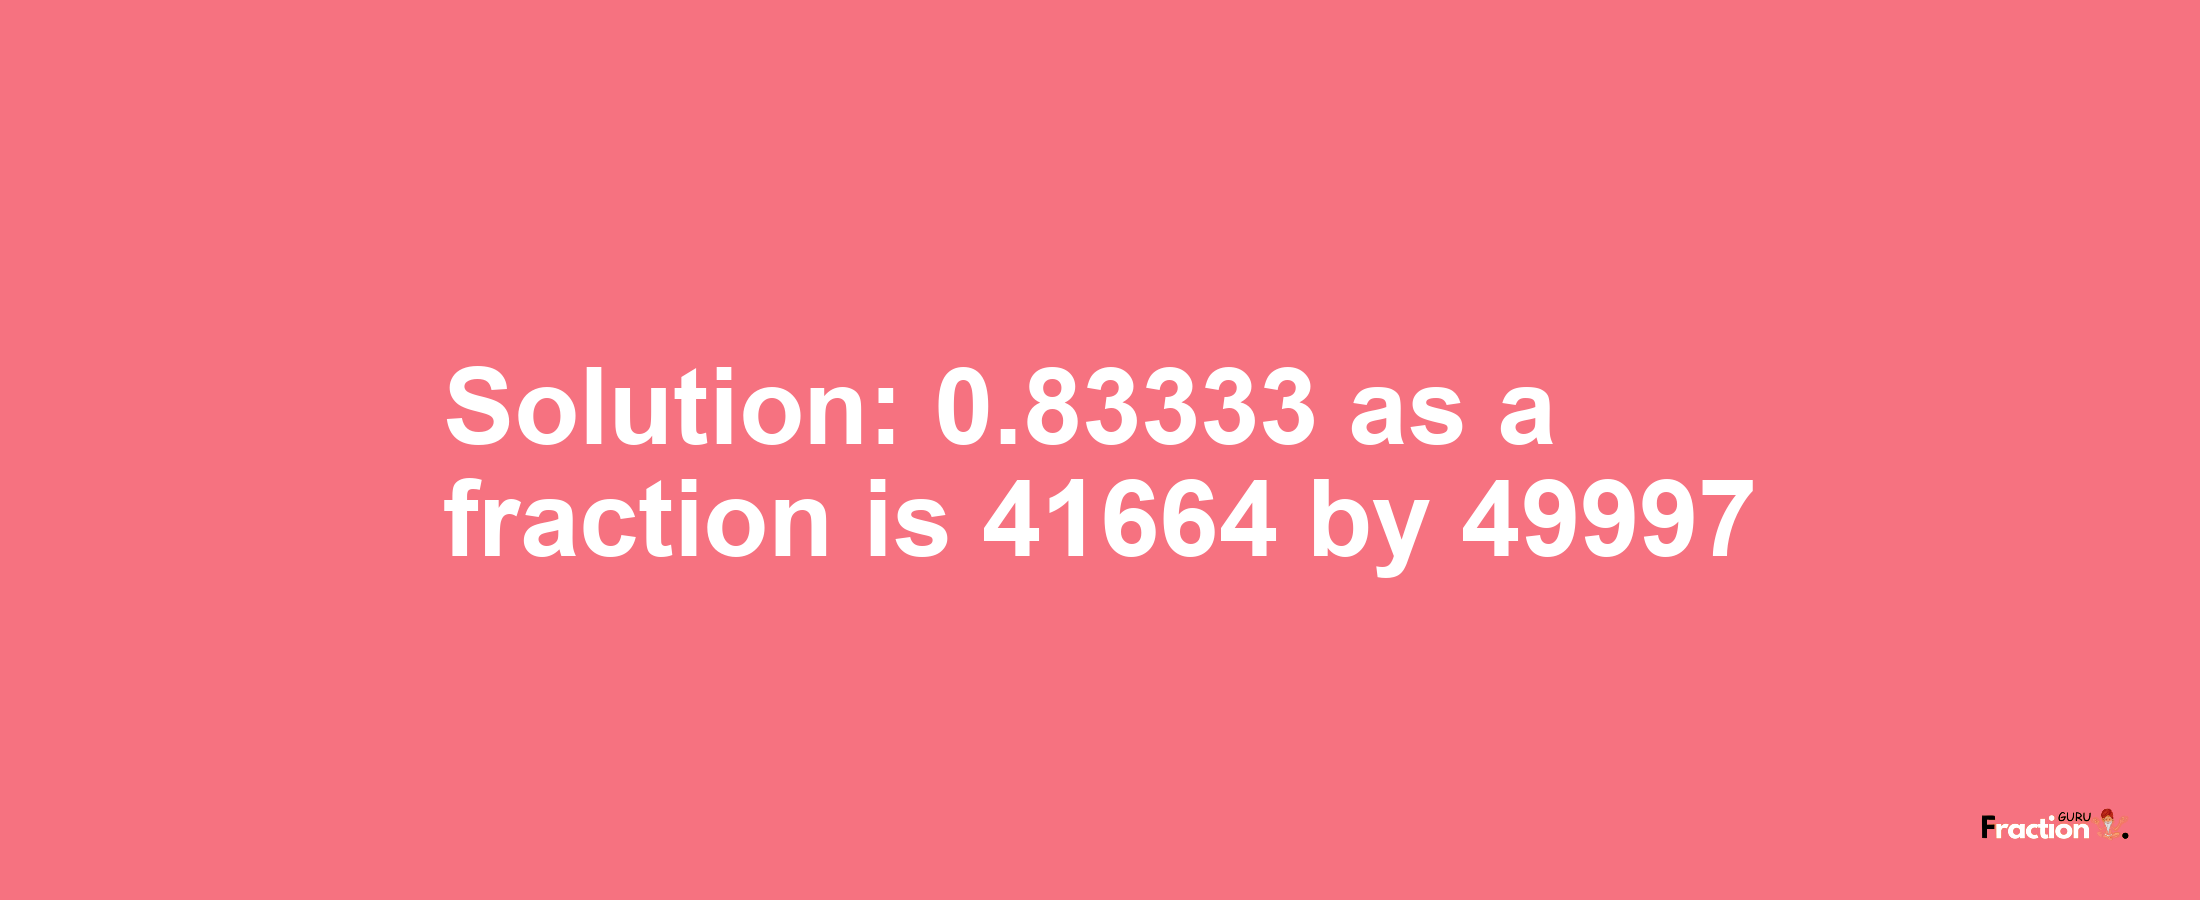 Solution:0.83333 as a fraction is 41664/49997